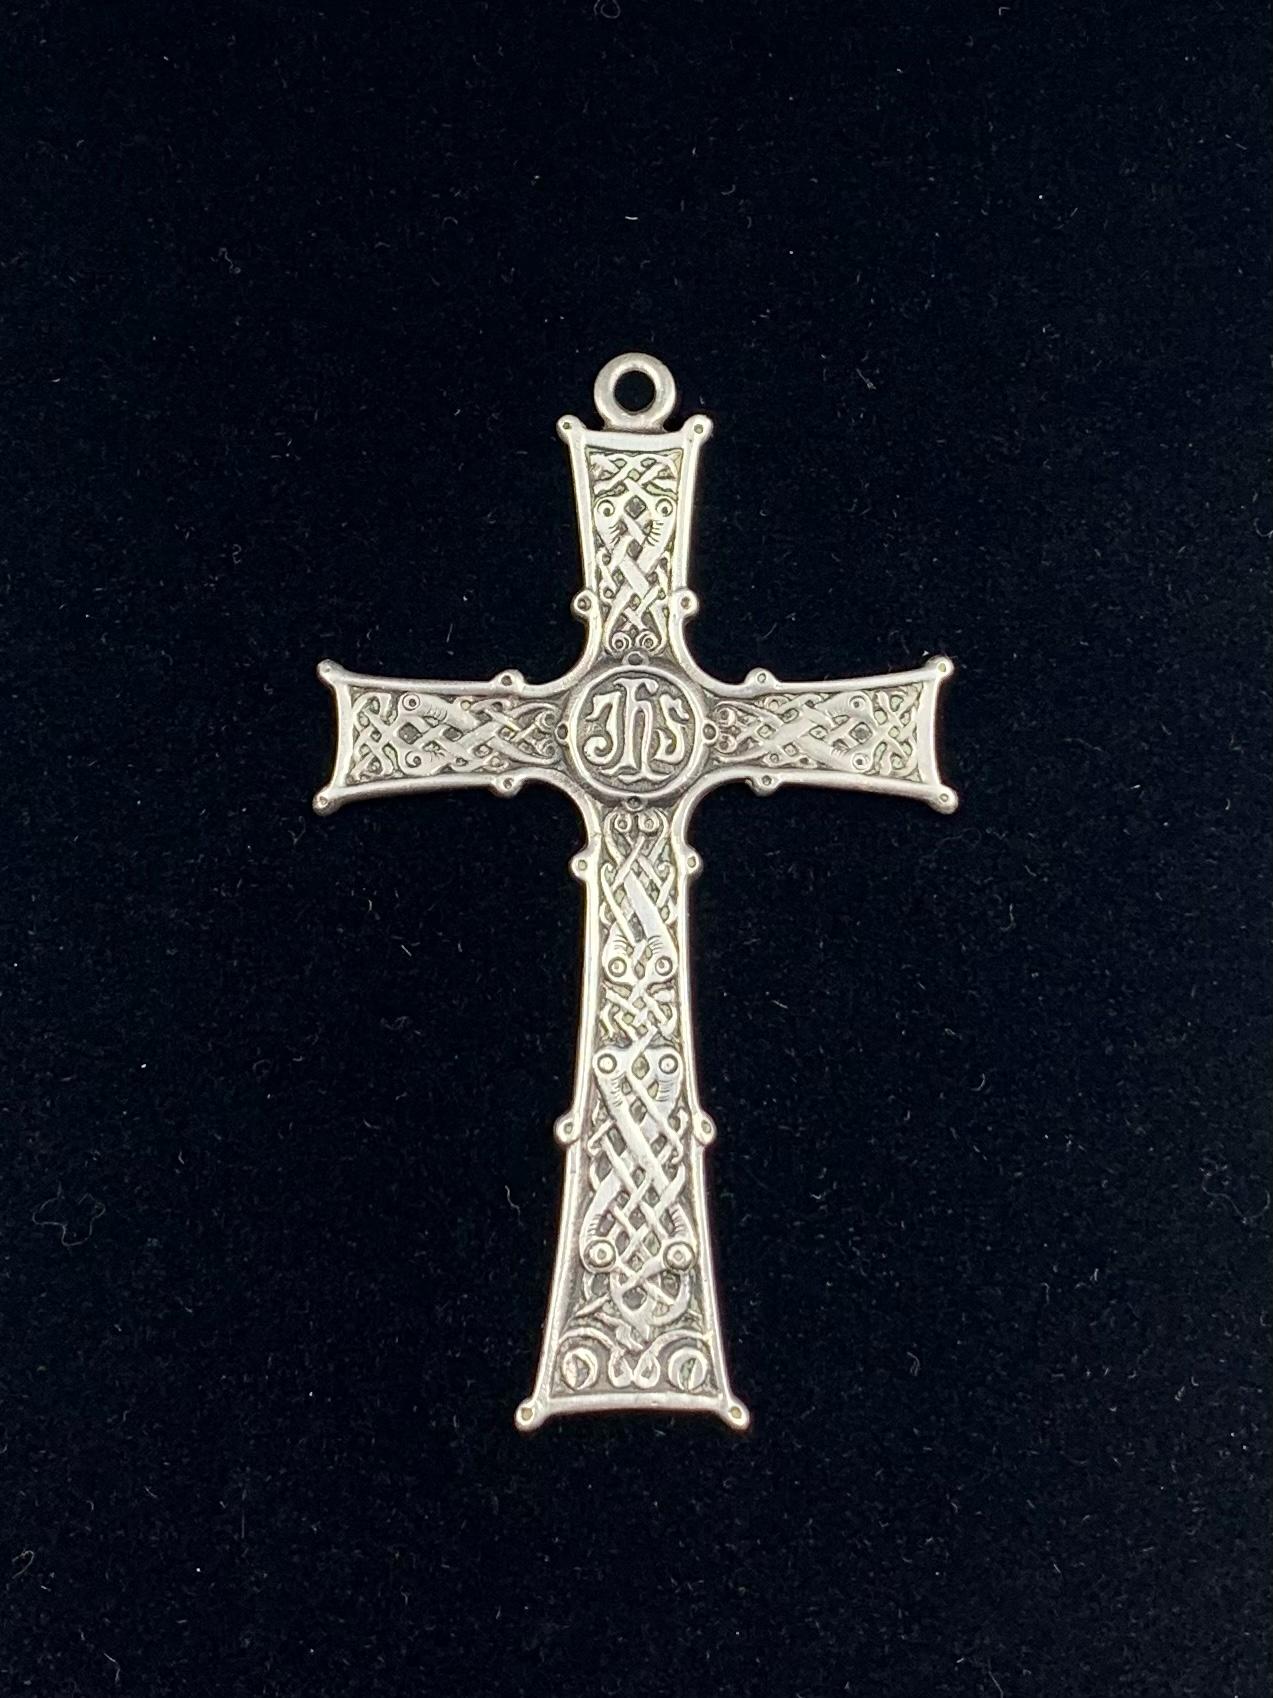 Finely detailed antique Scottish silver Celtic cross with exquisitely decorated arms featuring interlaced Medieval style motifs and a central nimbus with a Christogram, the stylized letters JHS for Jesus Hominis Salvatus, or “Jesus Savior of